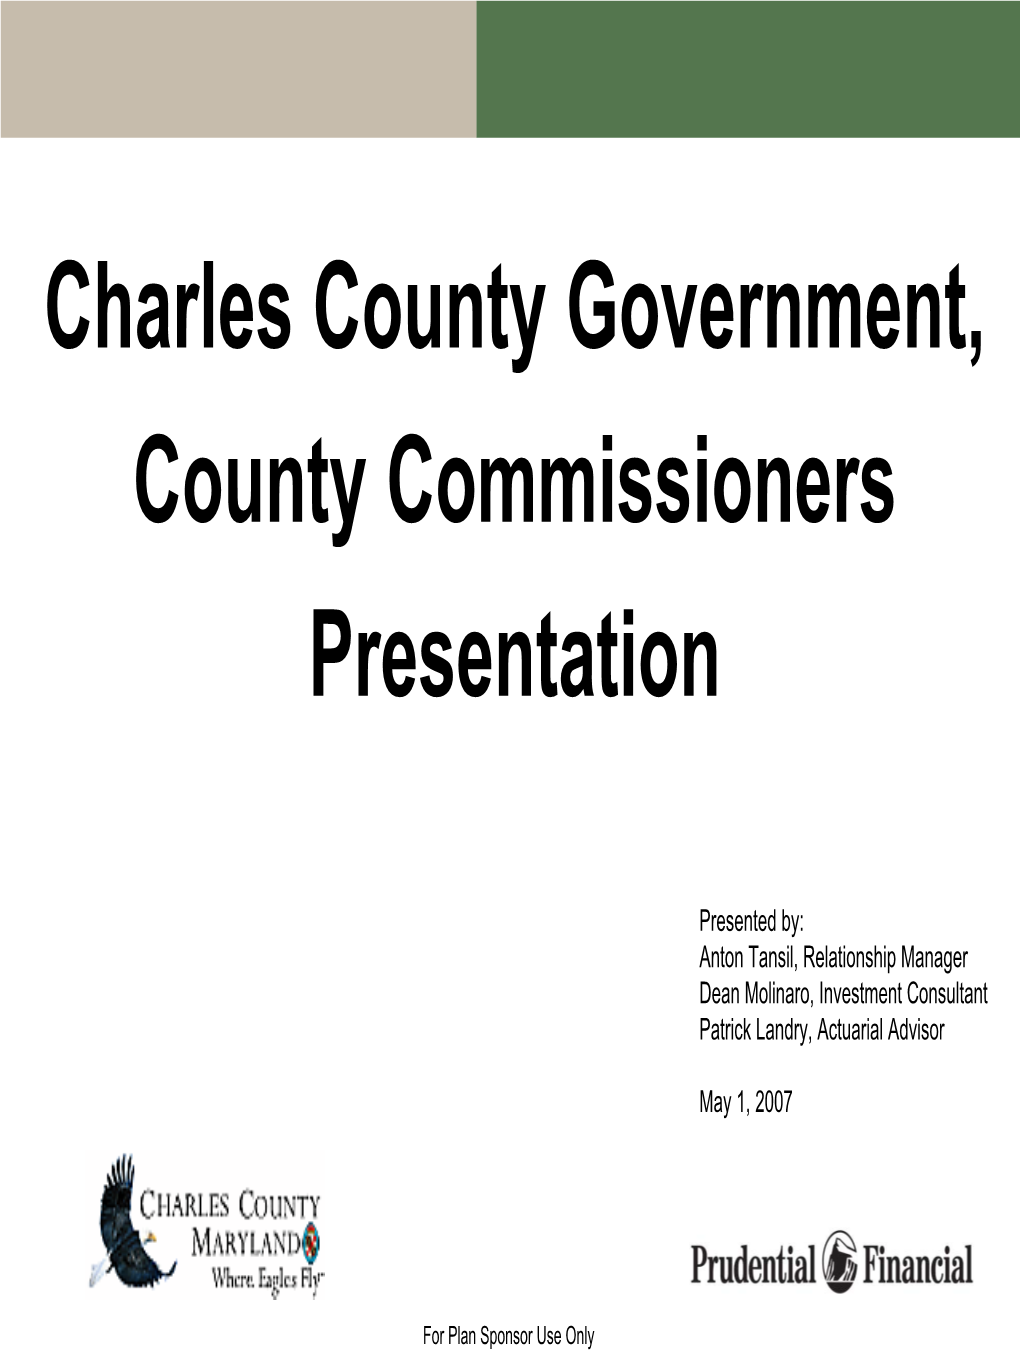 Charles County Government, County Commissioners Presentation